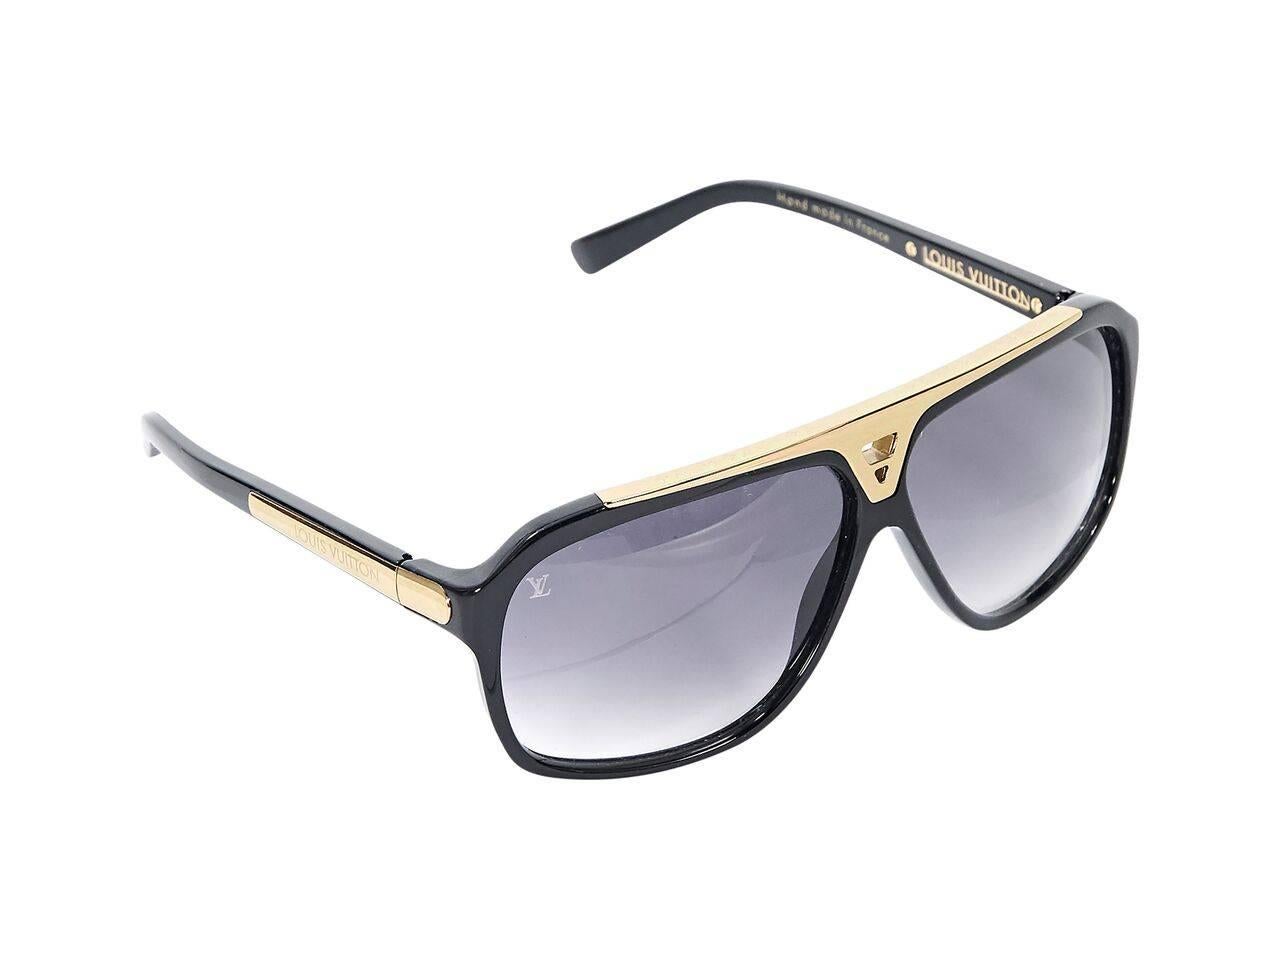 Product details:  Black Faux Semblant aviator sunglasses by Louis Vuitton.  Trimmed with goldtone hardware.  Gradient lenses.  
Condition: Pre-owned. Very good.
Est. Retail $ 1,000.00